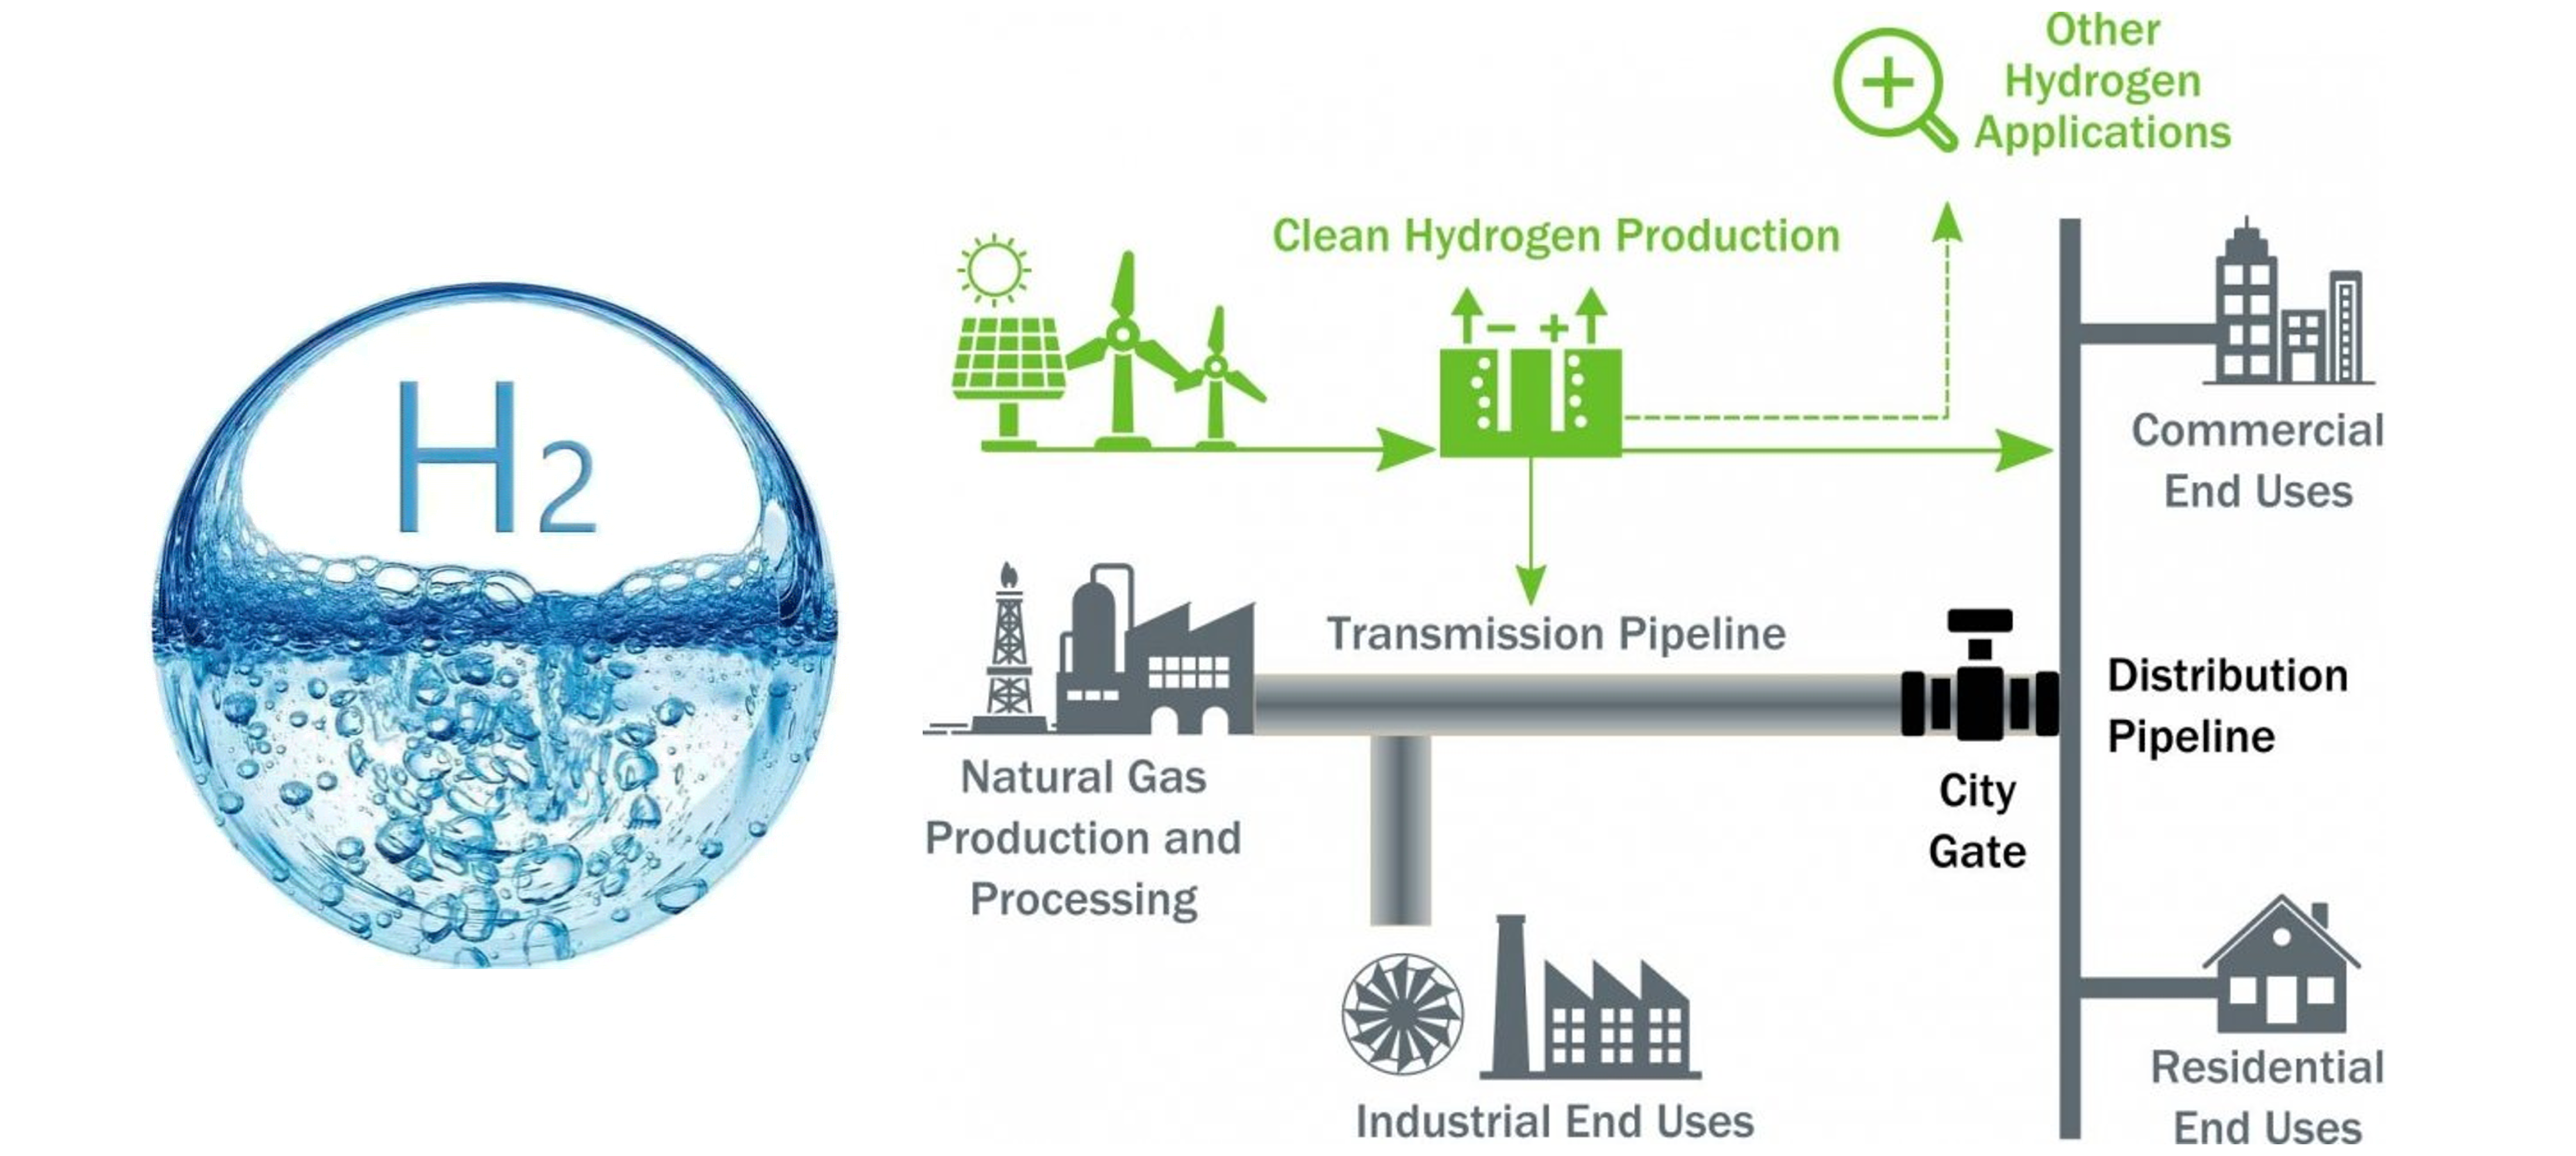 Above figure shows the future infrastructure for hydrogen economy, from hydrogen production using renewable energies, to transmission pipeline system for hydrogen transportation, and finally to commercial and residential hydrogen end users.   